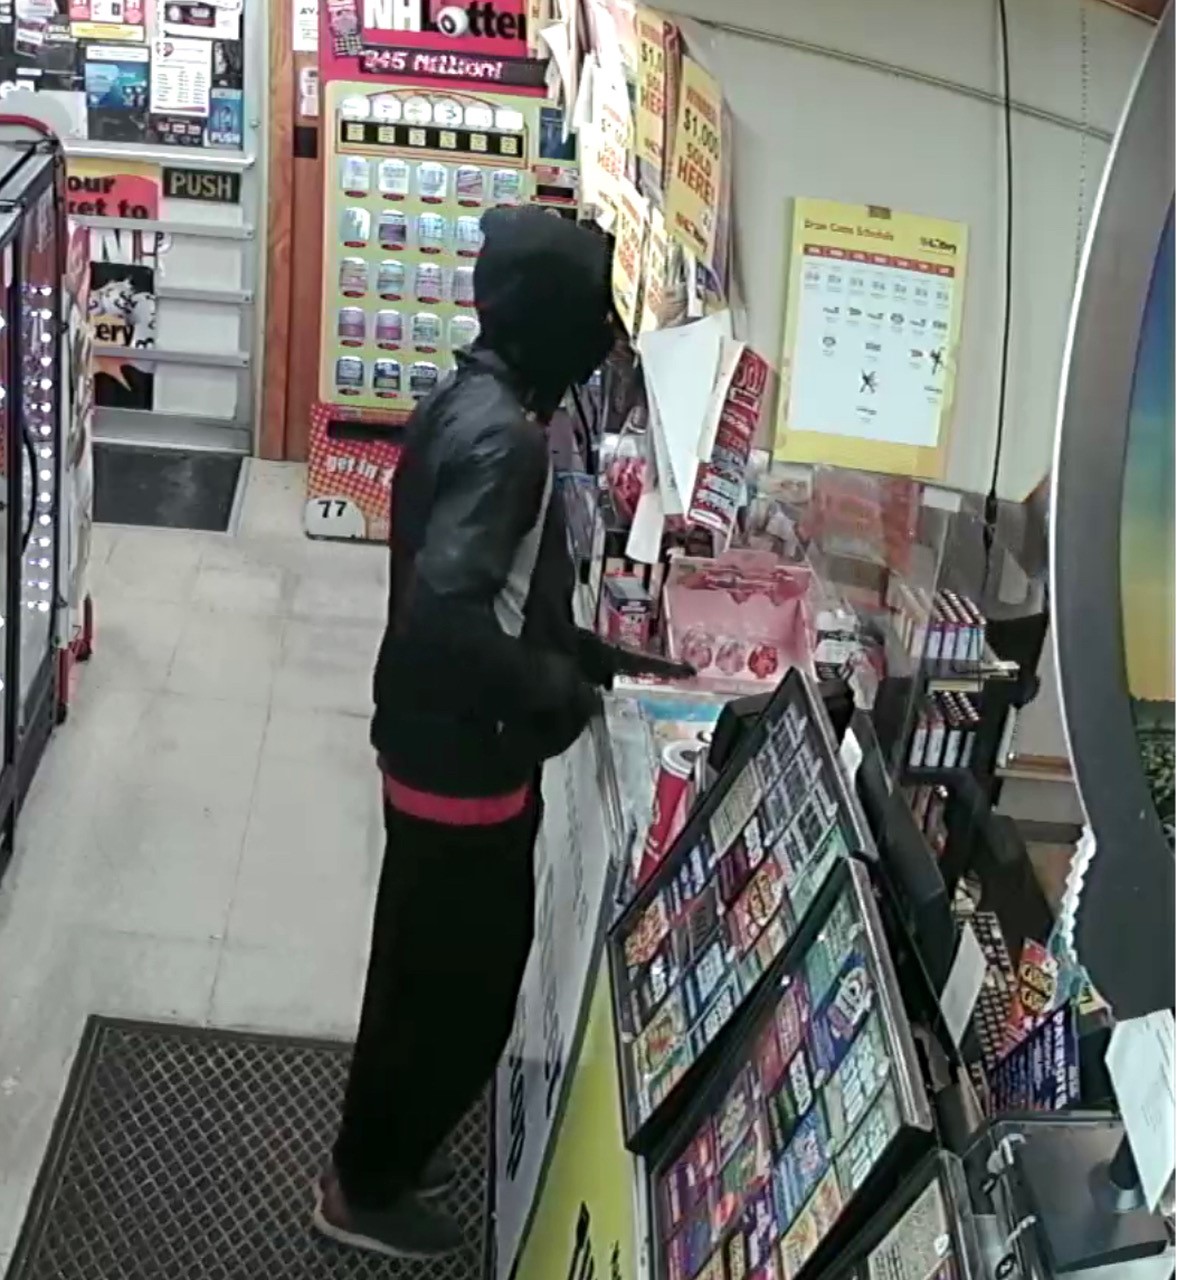 Armed Robbery 2